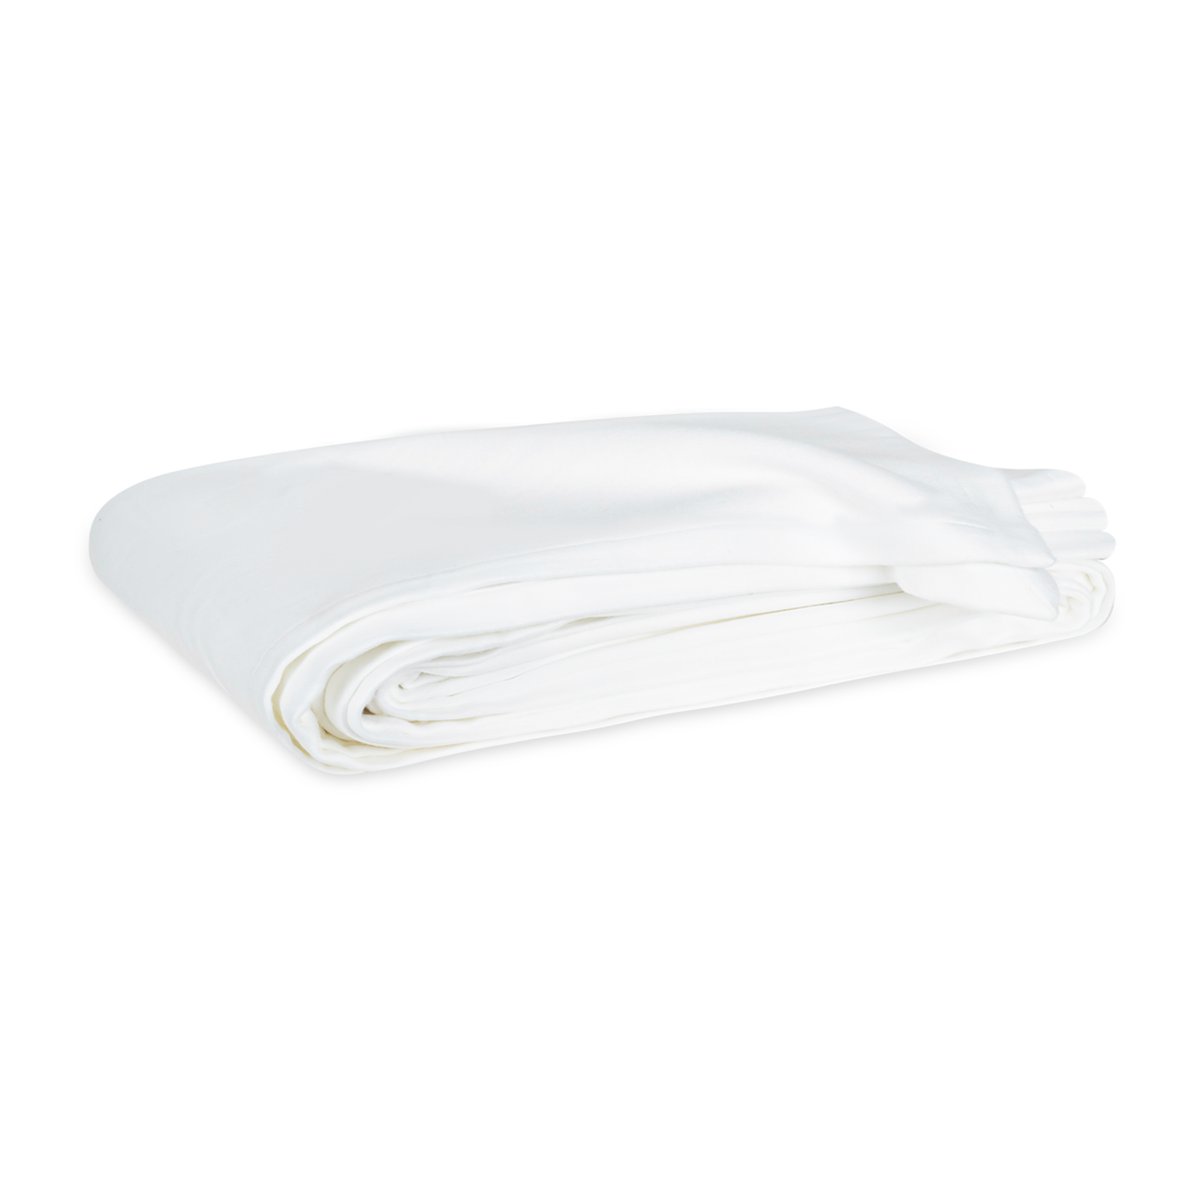 Folded Blanket of Matouk Dream Modal Collection in White Color